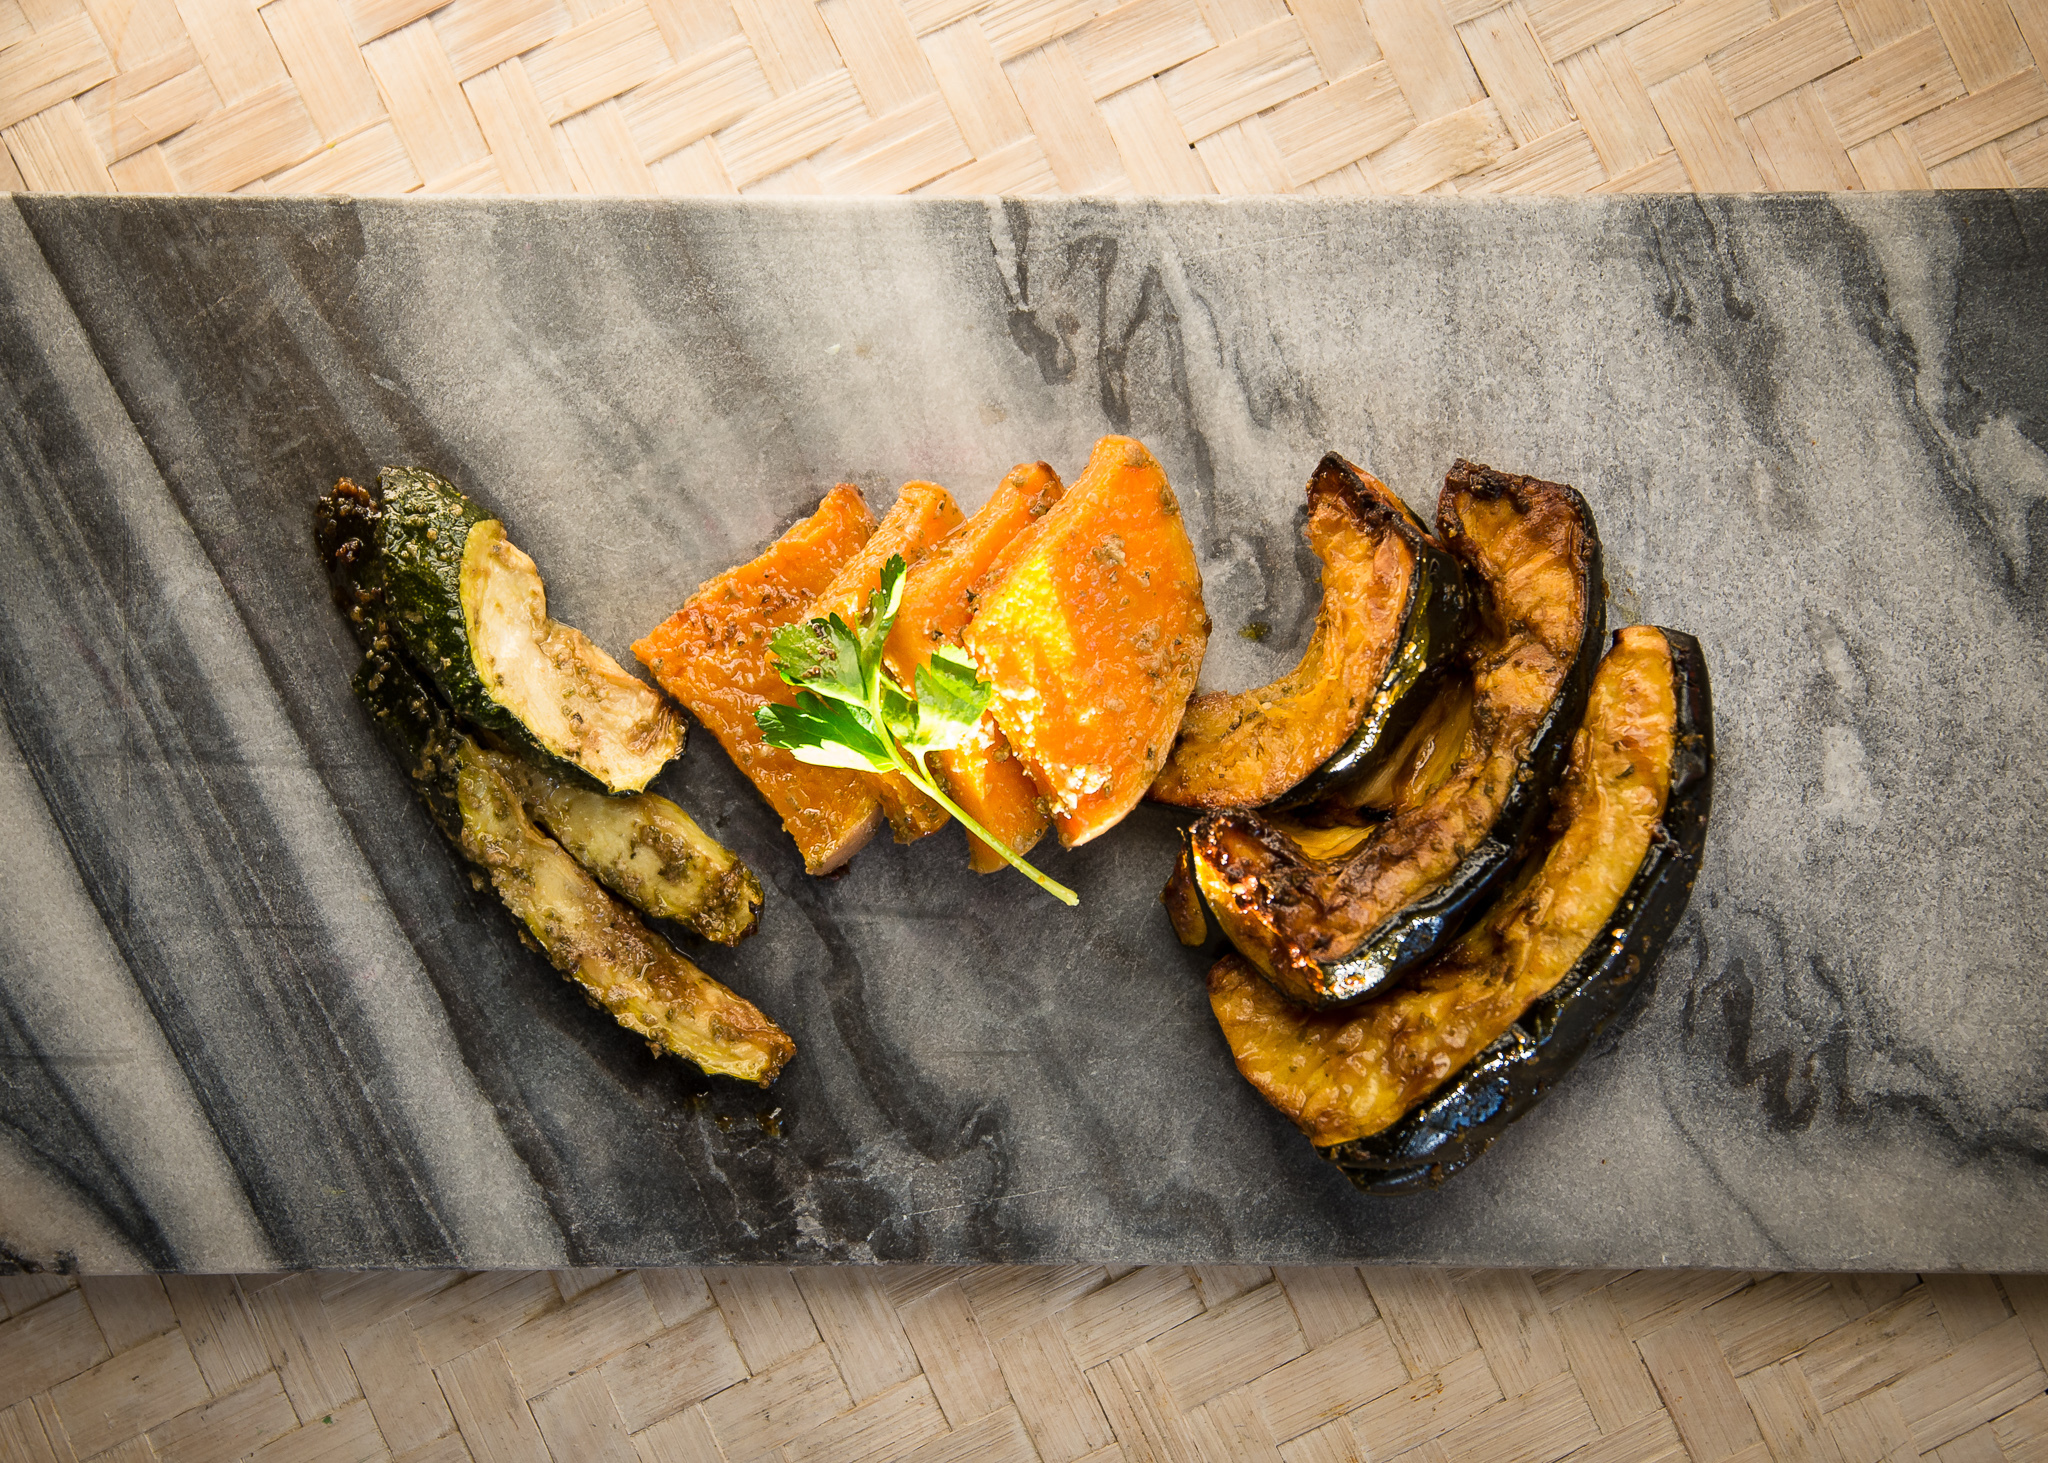 Honest Plate roasted squash and sweet potato.